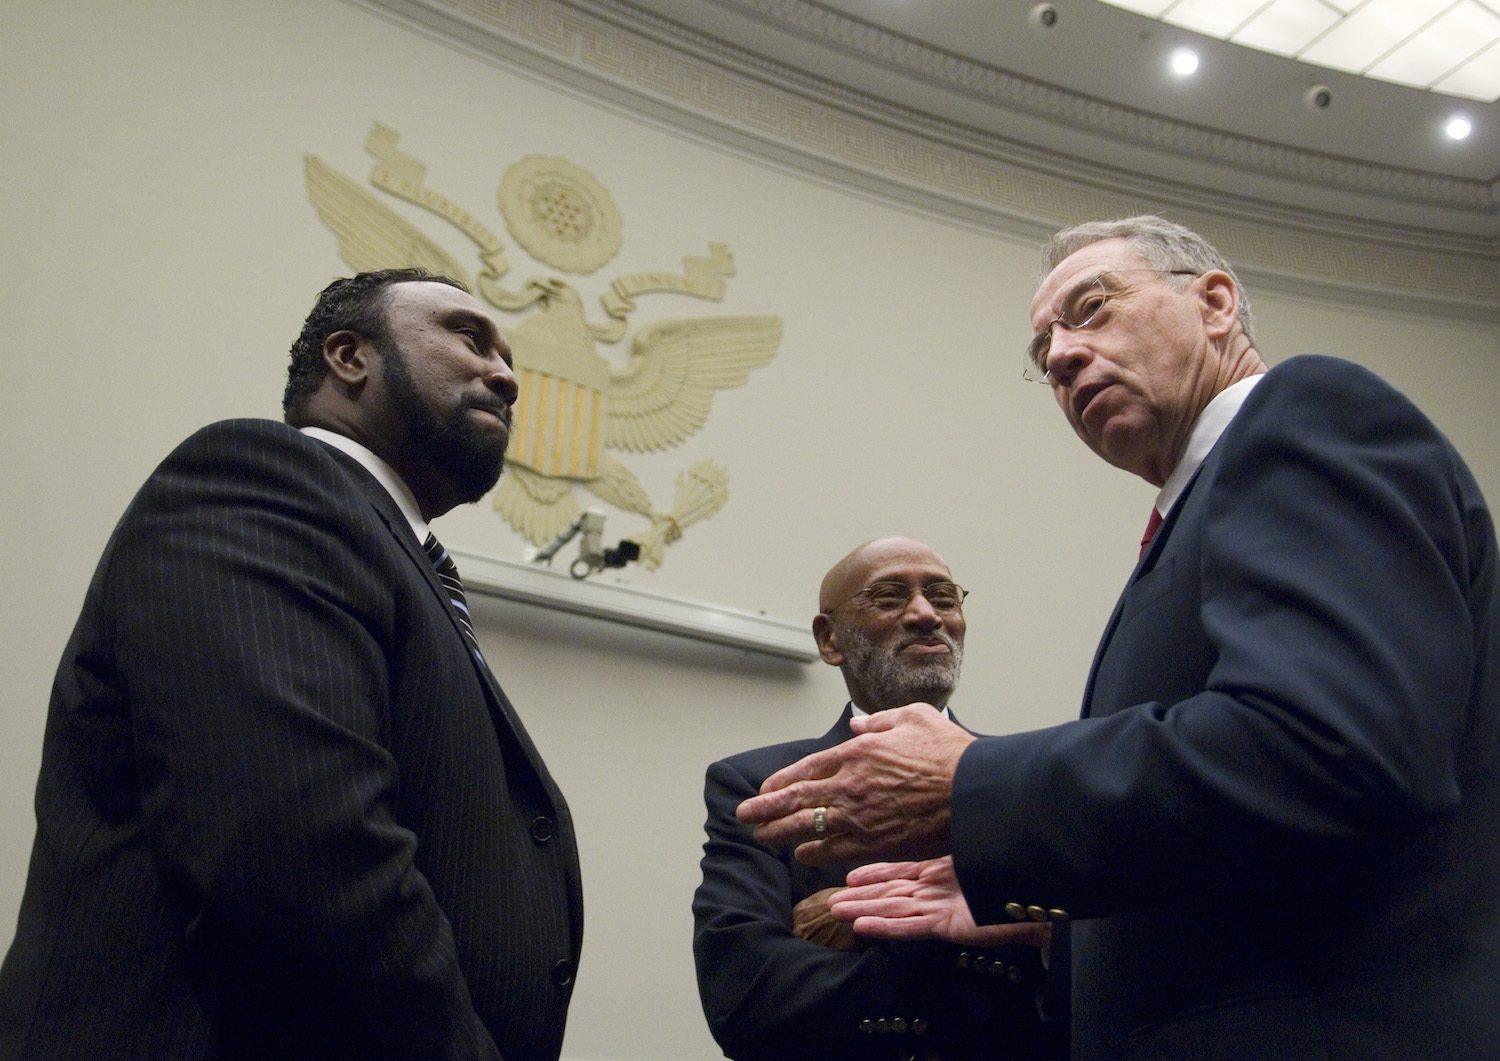 From left, John Boyd Jr., president of the National Black Farmers Association, Lawrence Lucas, president USDA Coalition of Minority Employees, and Sen. Charles Grassley, R-Iowa, talk before the start of the House Judiciary Committee Constitution, Civil Rights, and Civil Liberties Subcommittee hearing on H.R.558, the 